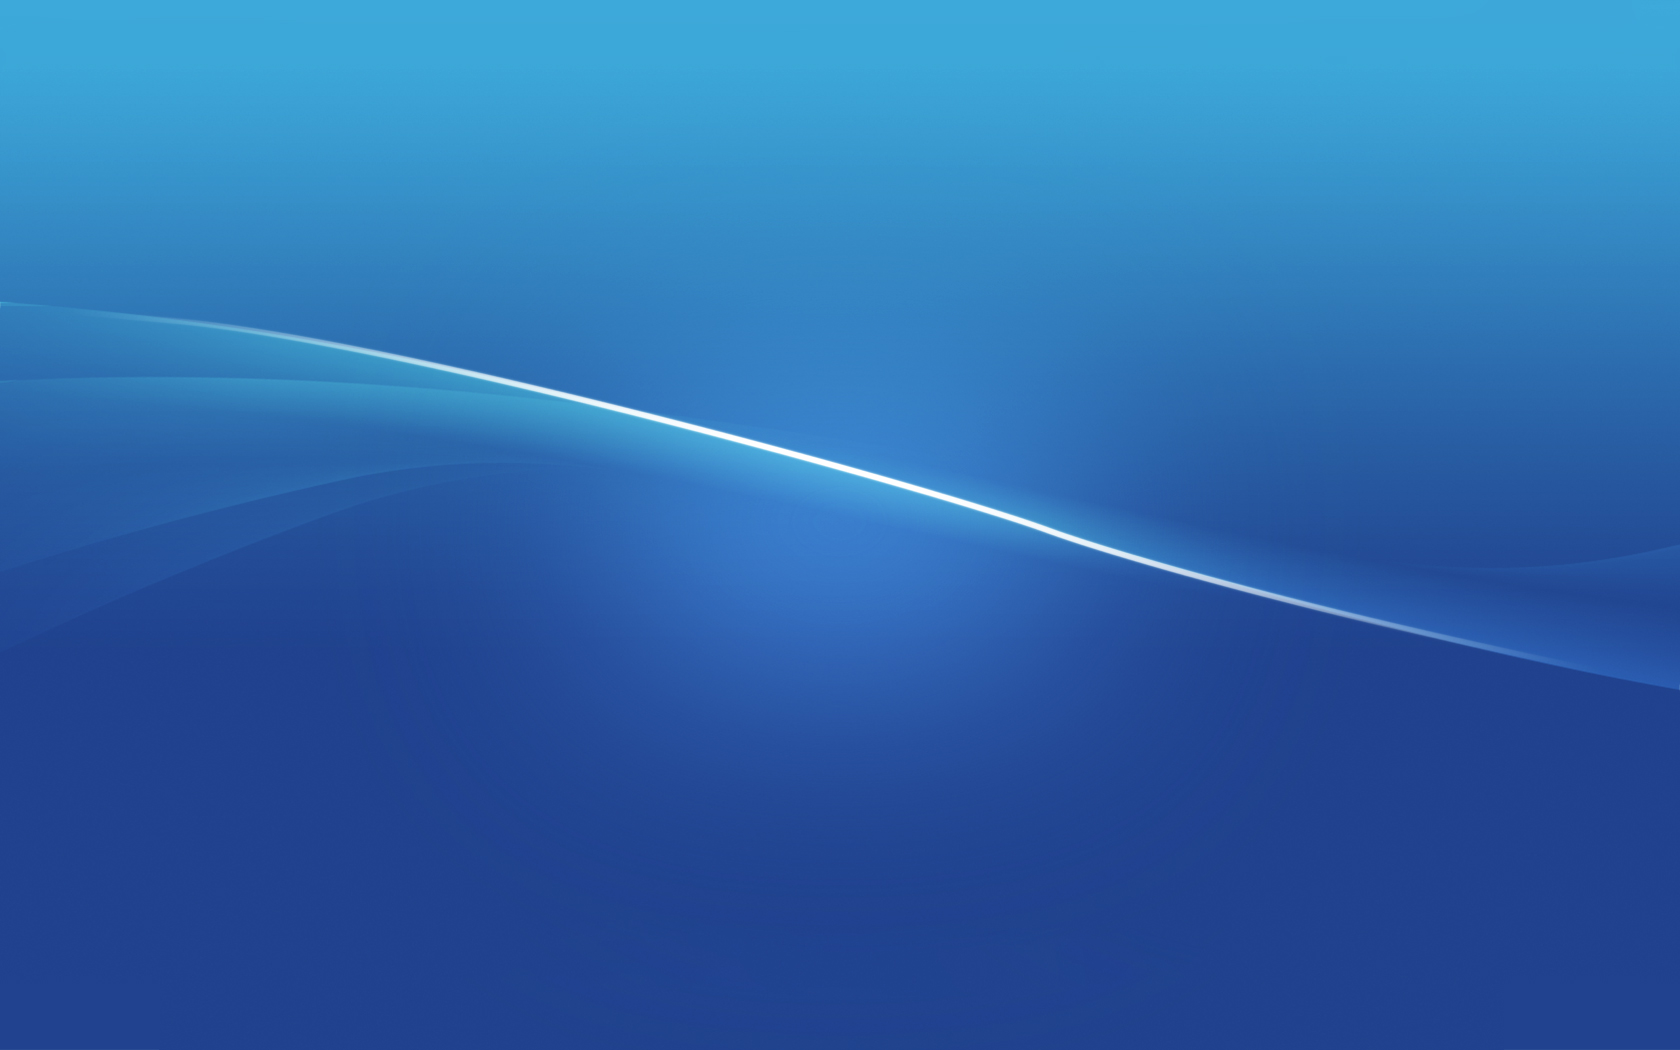  Abstract Desktop Backgrounds HD Wallpapers Art Images blue